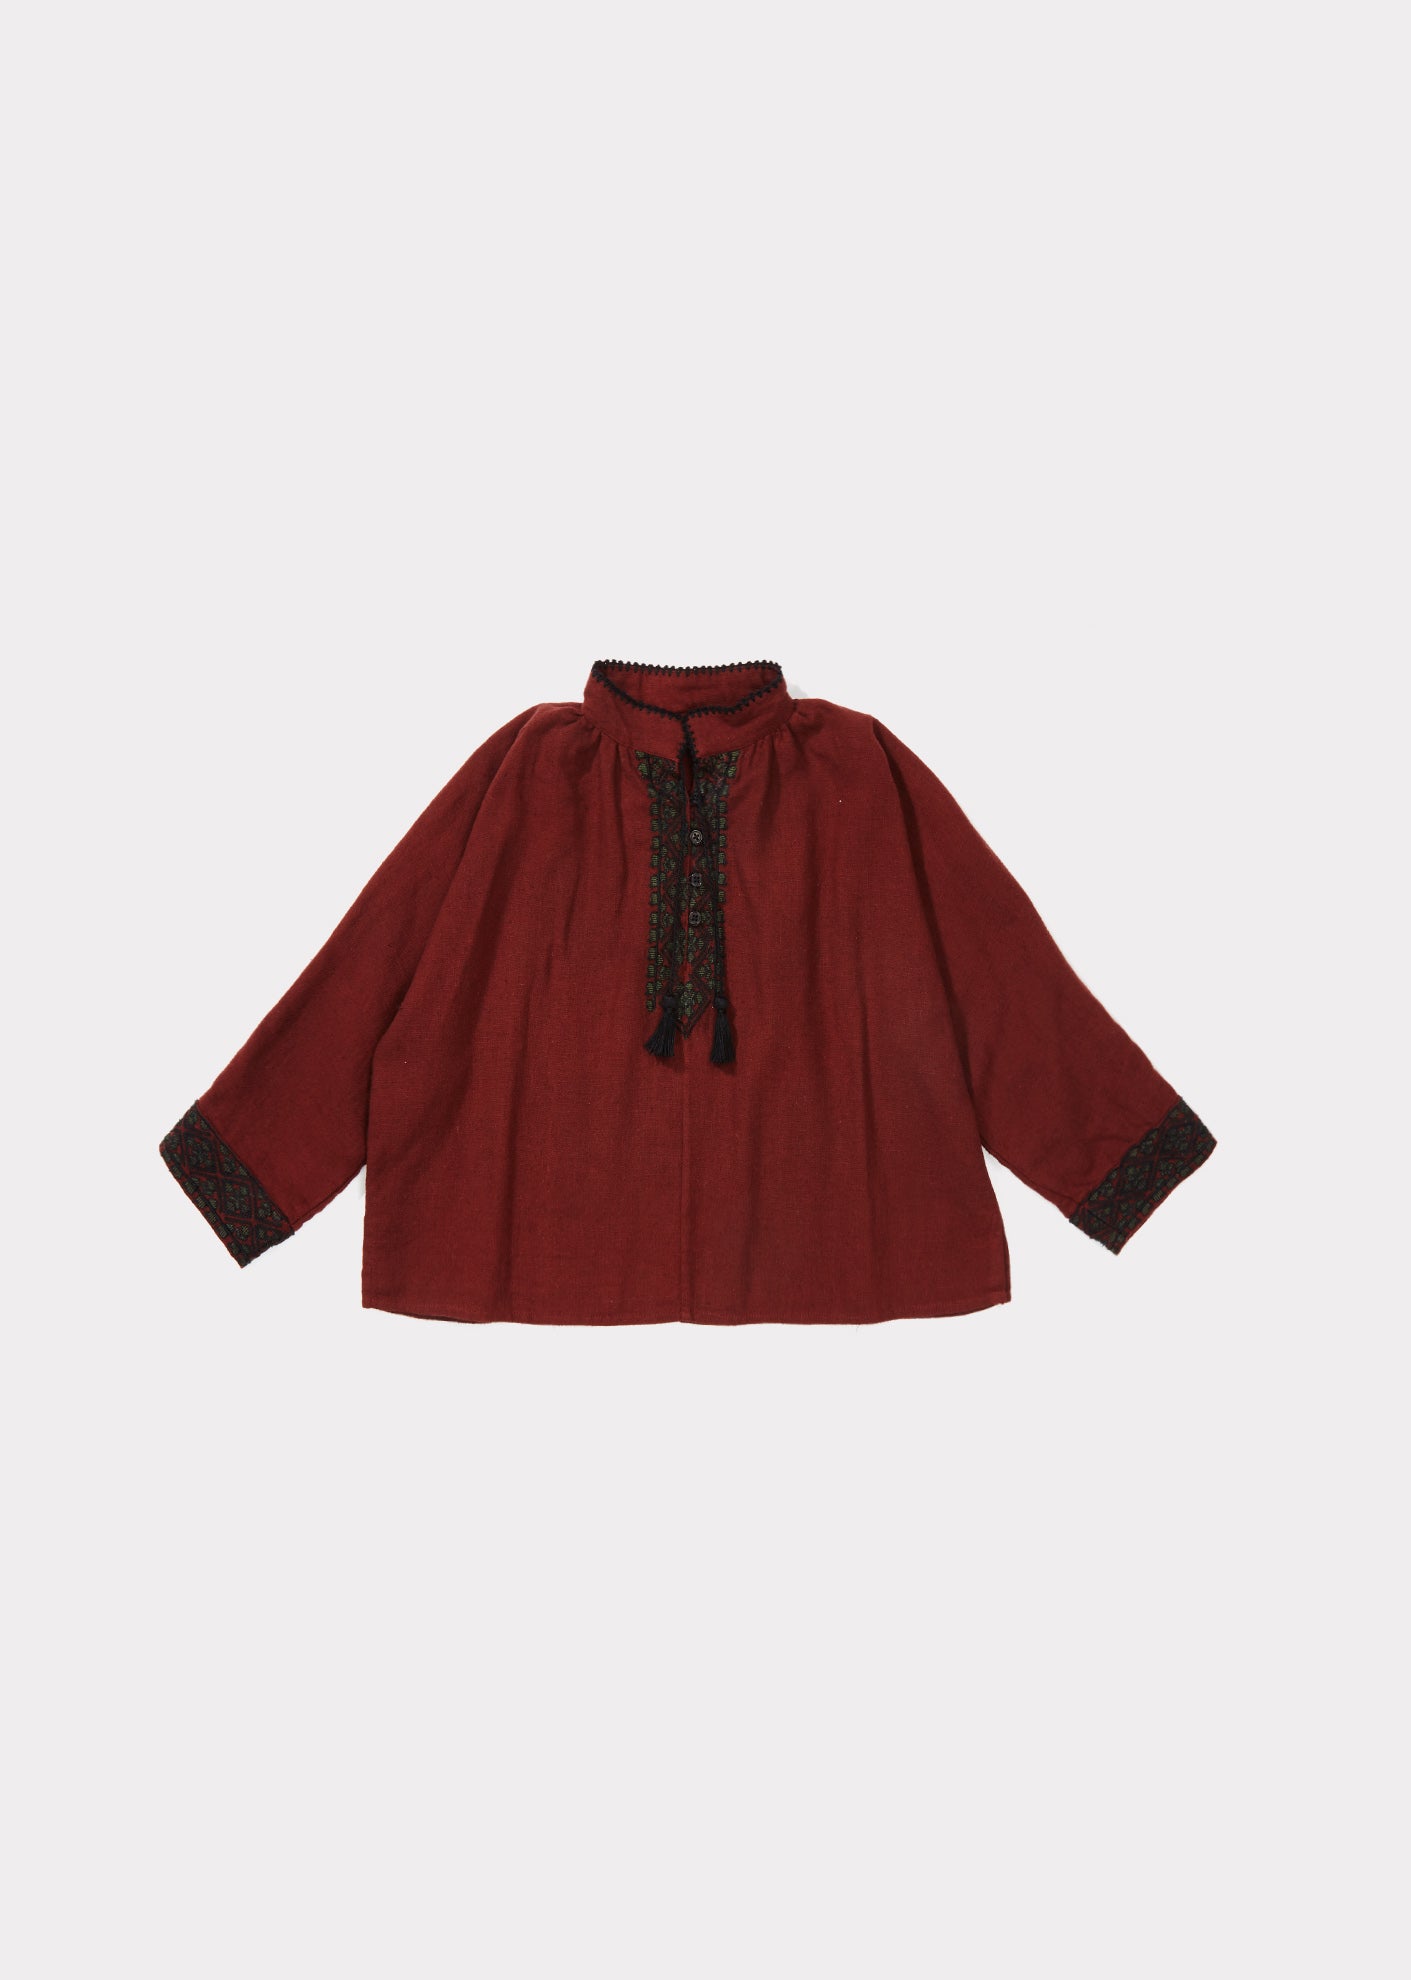 Girls Wine Red Cotton Blouse